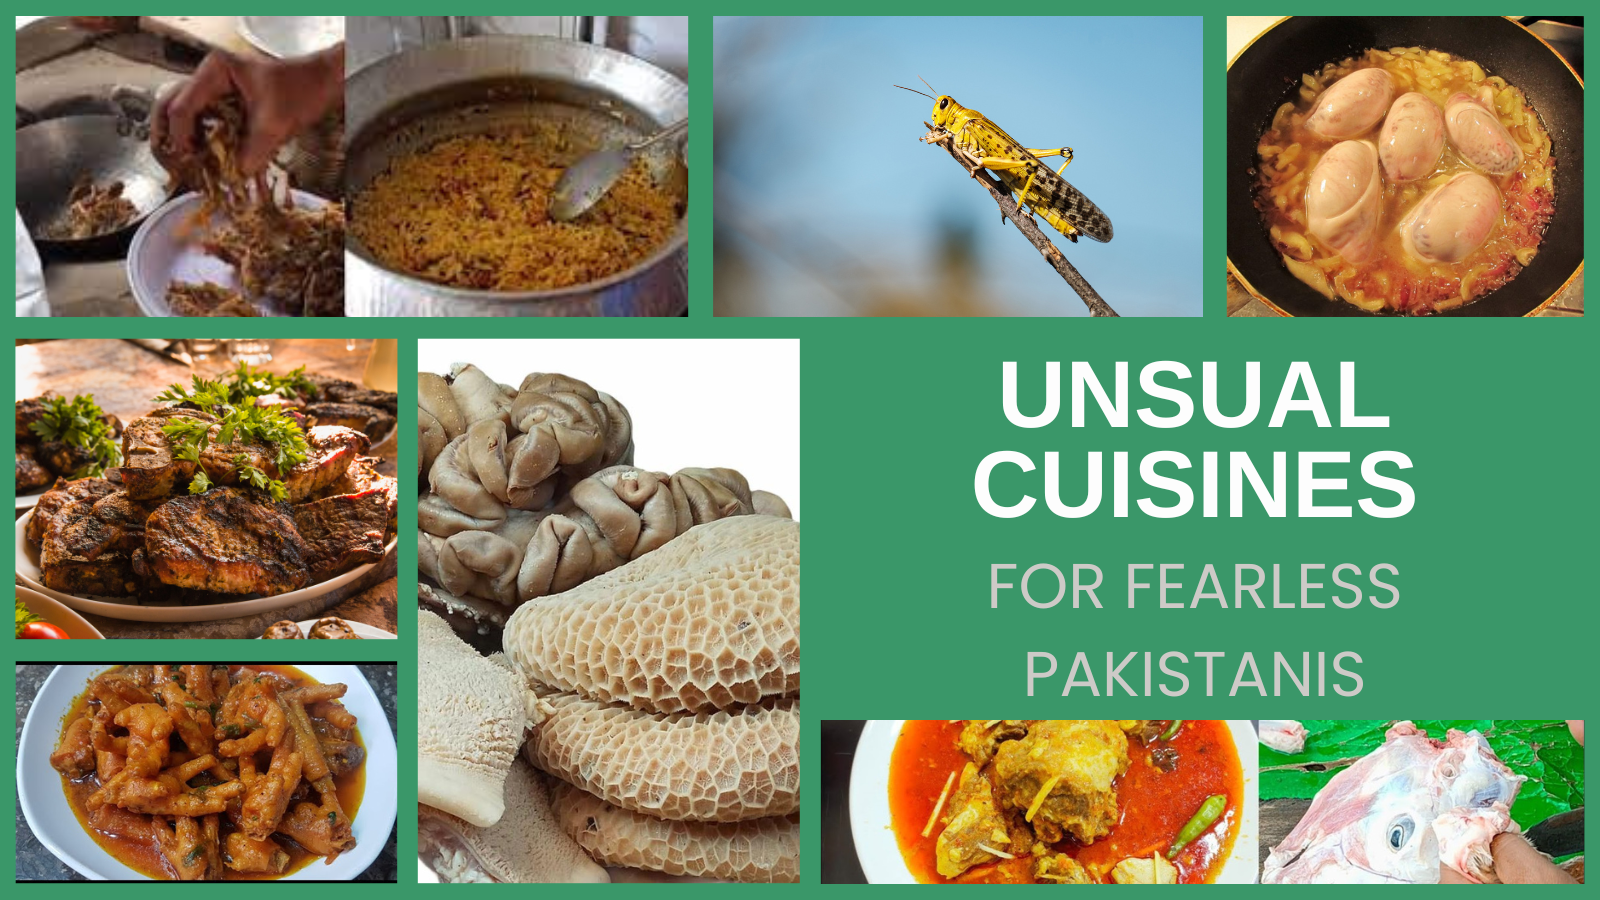 Unbelievable foods only fearless Pakistanis love to eat